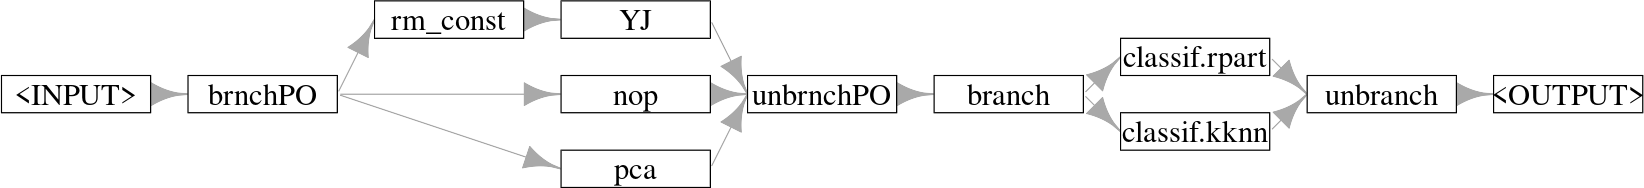 Graph starts with "<INPUT> -> brnchPO" which has three arrows to "removeconstants -> yeojohnson", "nop", and "pca", which all then point to "unbrnchPO -> branch", which then has two arrows to "classif.rpart" and "classif.kknn" which then both point to "unbranch -> <OUTPUT>".